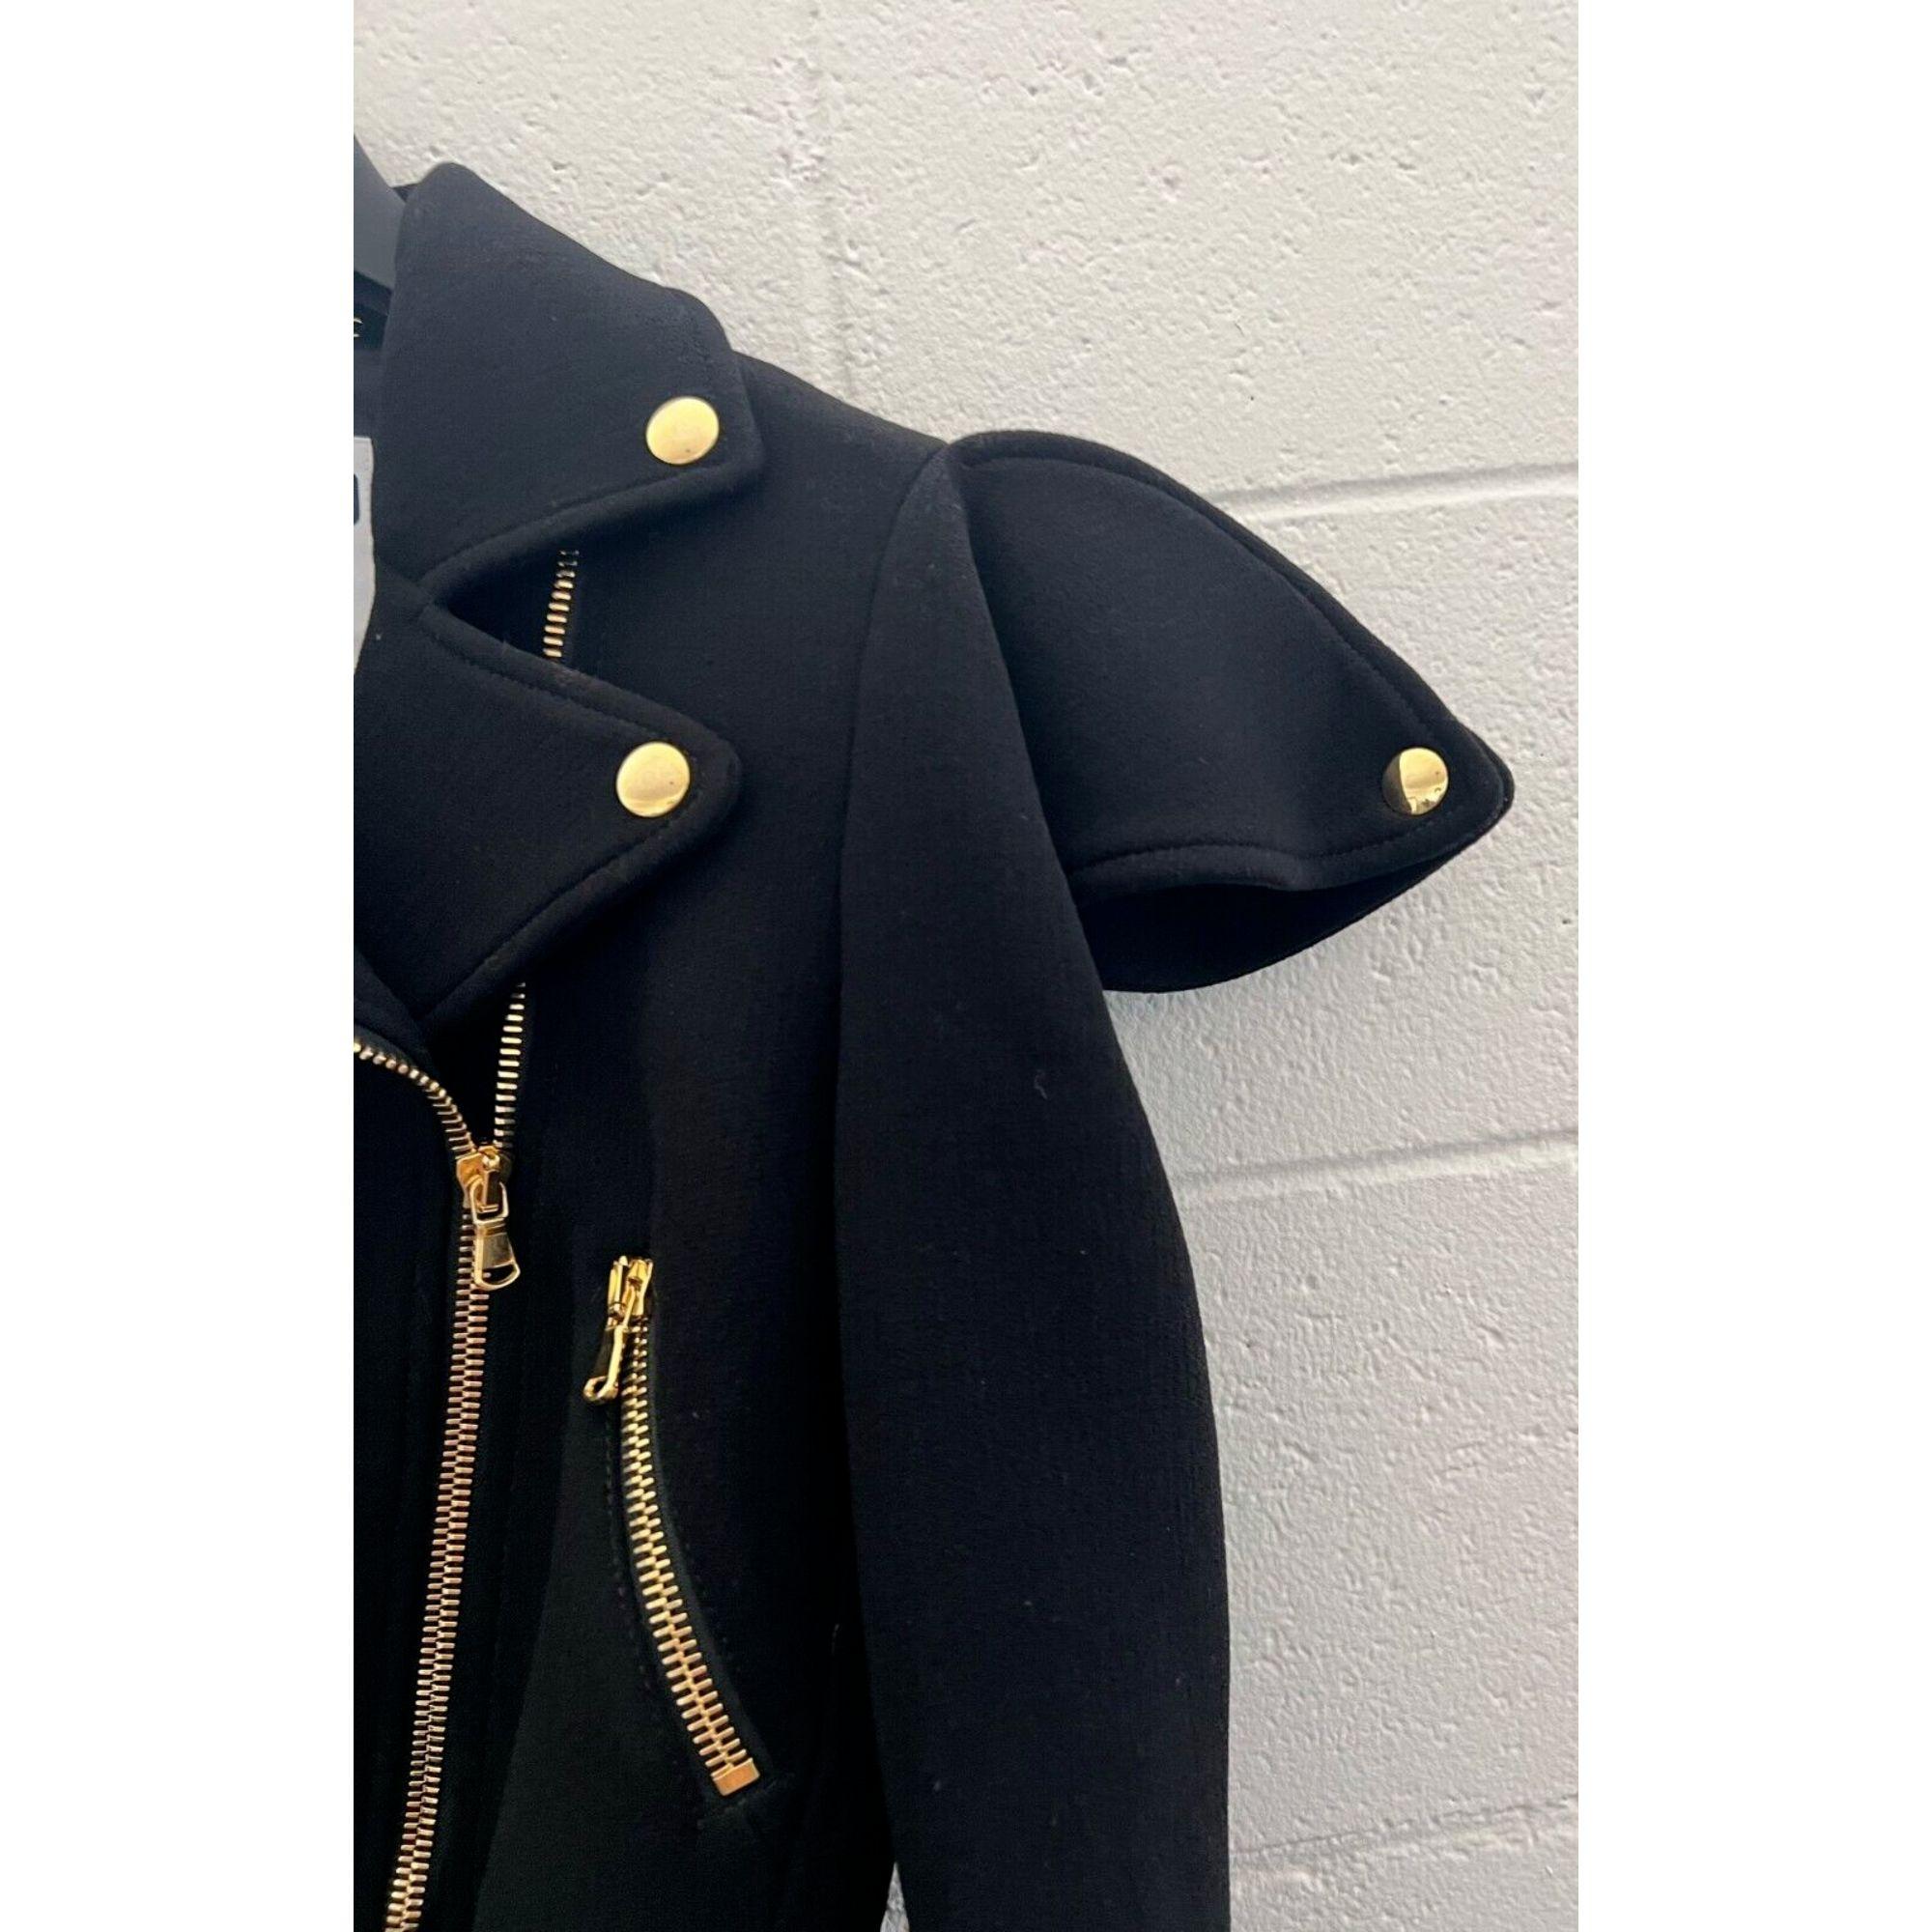 AW21 Moschino Couture Viscose Jacket/Coat with Gold Hardware by Jeremy Scott For Sale 3